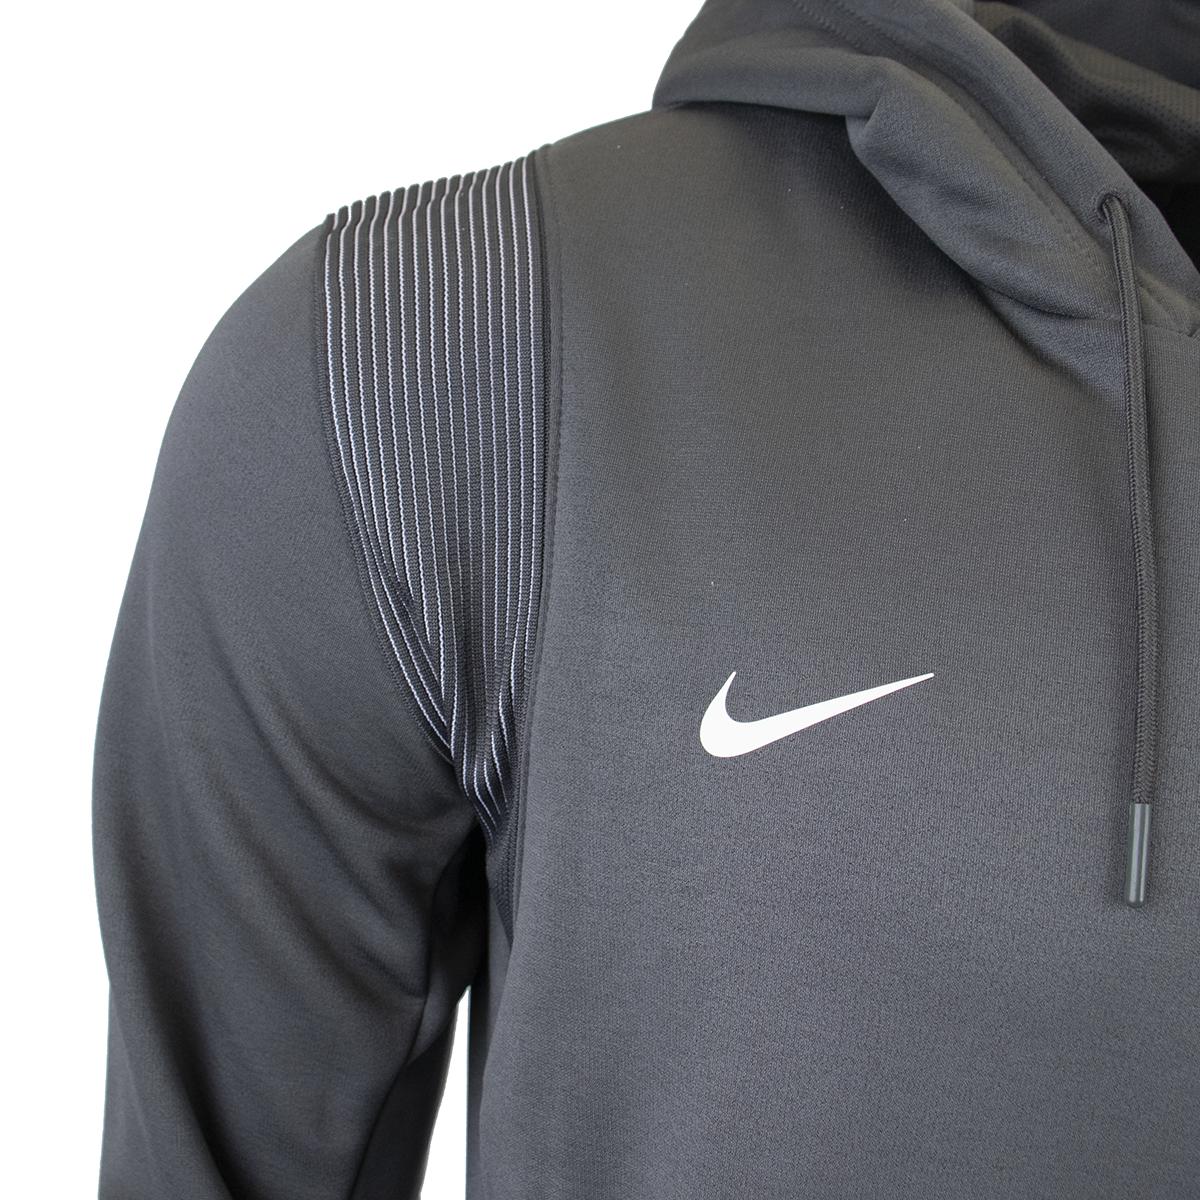 Barstool Sports Nike Therma Football Pullover Hoodie-Hoodies & Sweatshirts-Barstool Sports-Barstool Sports